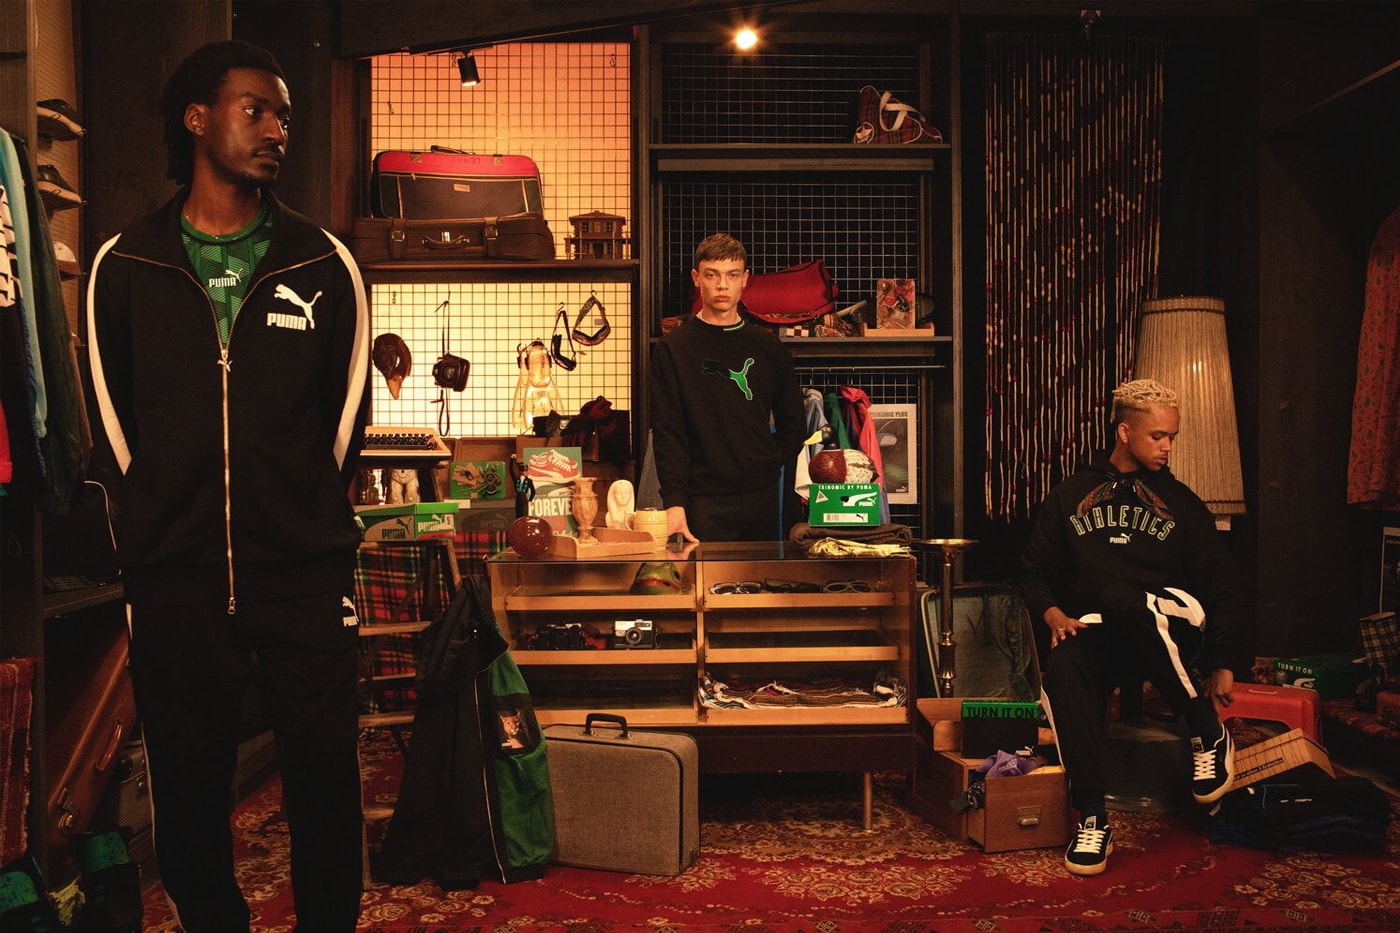 First Look at Puma's The Never Worn Sneaker Capsule archive deadstock sneakers rare distressed suede vtg blaze of glory slipstream lo spacelab white green gold t7 tracksuit coach jacket hoodie early december release info date